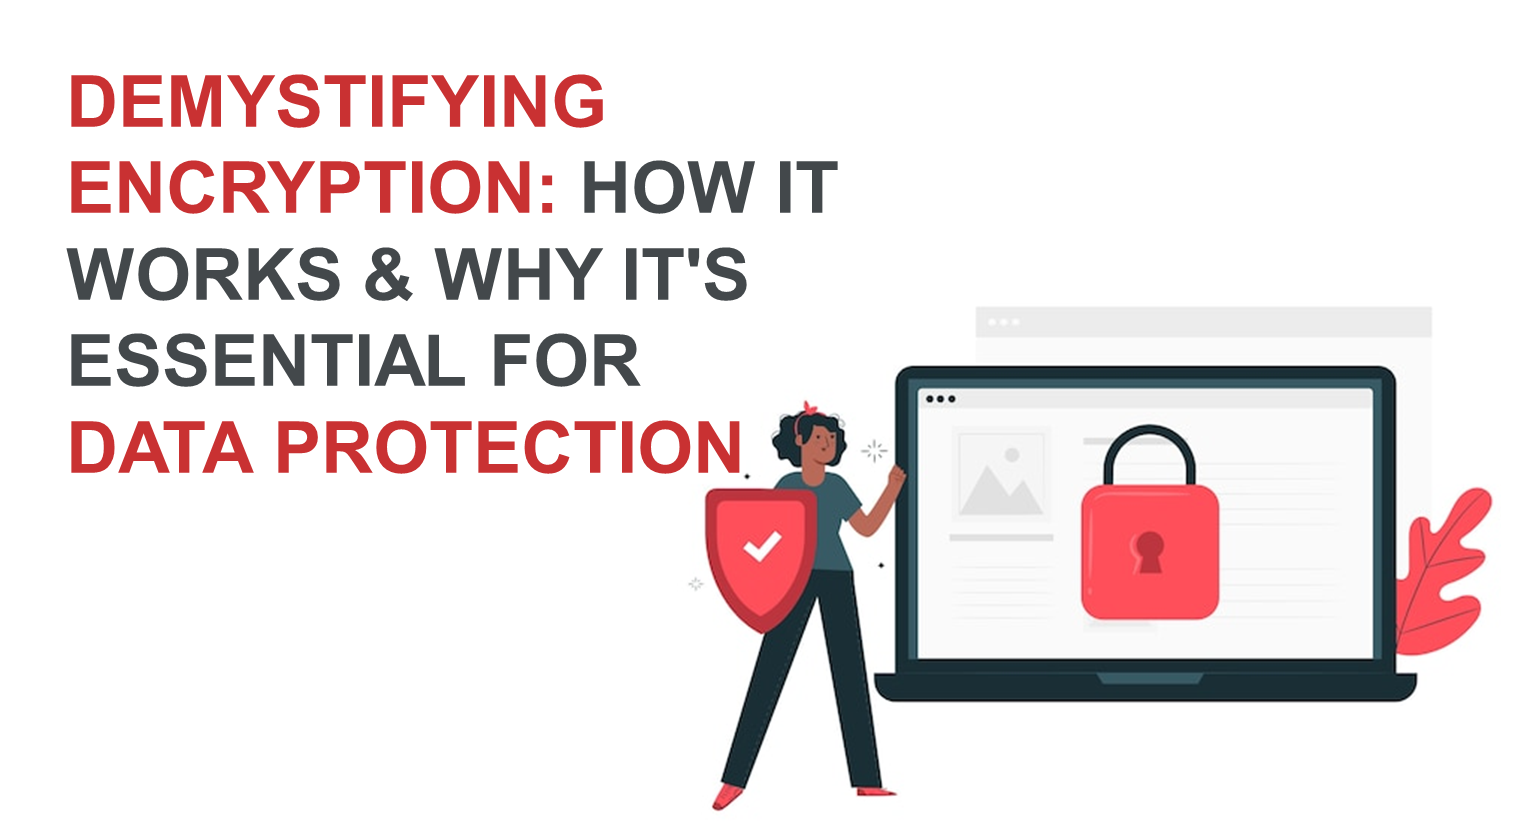 Demystifying Encryption: How It Works and Why It's Essential for Data Protection